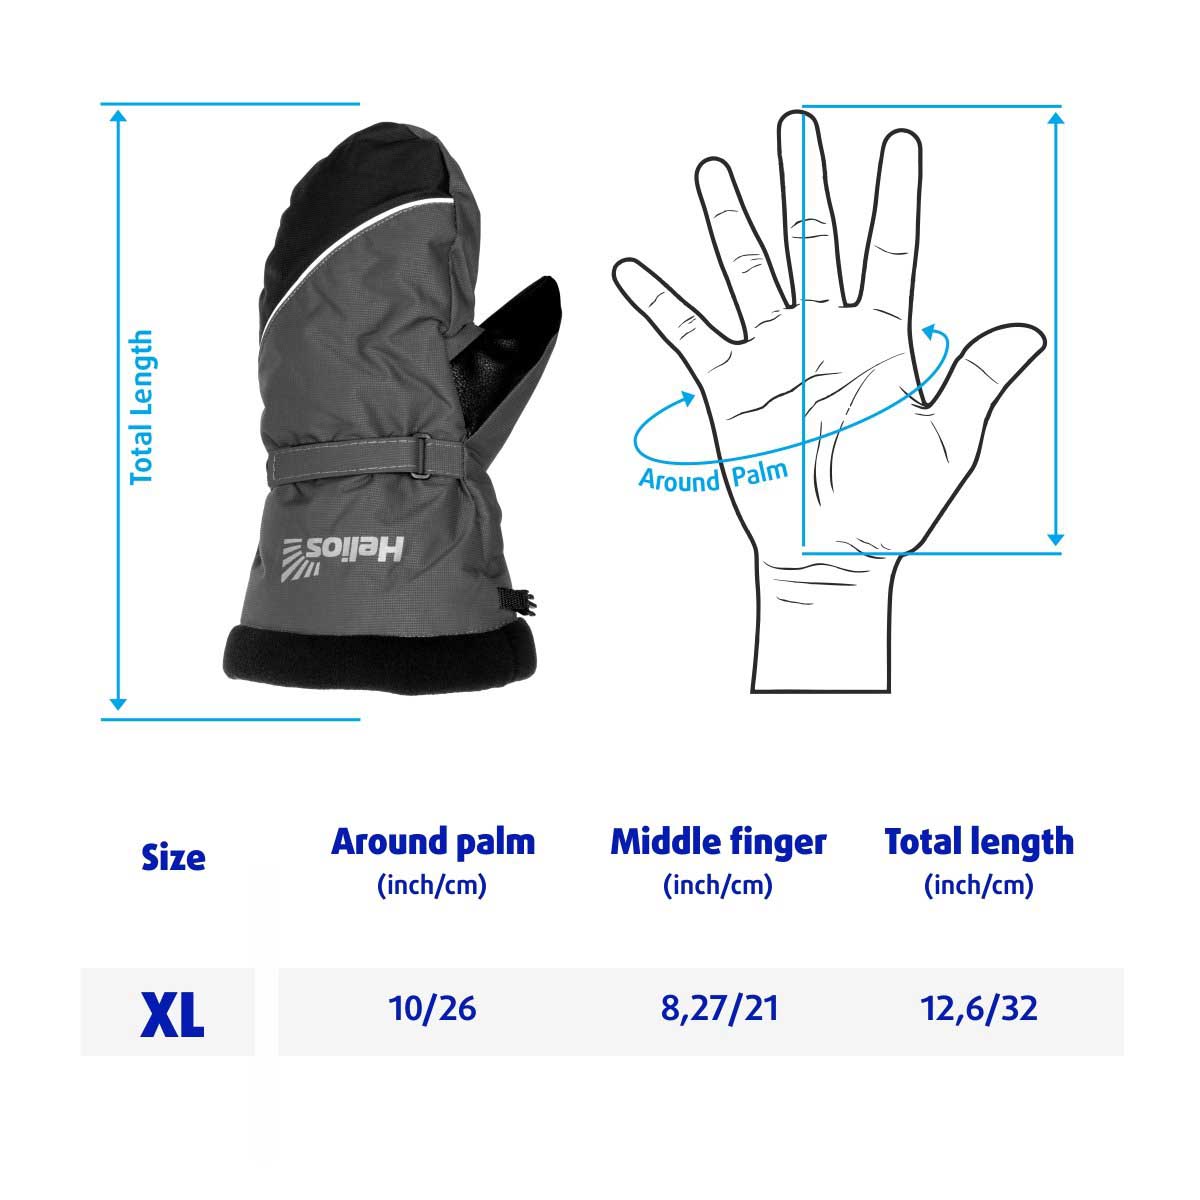 Nord Fleece Mitts Winter Sports Mittens for Men are available in M,L and XL sizes